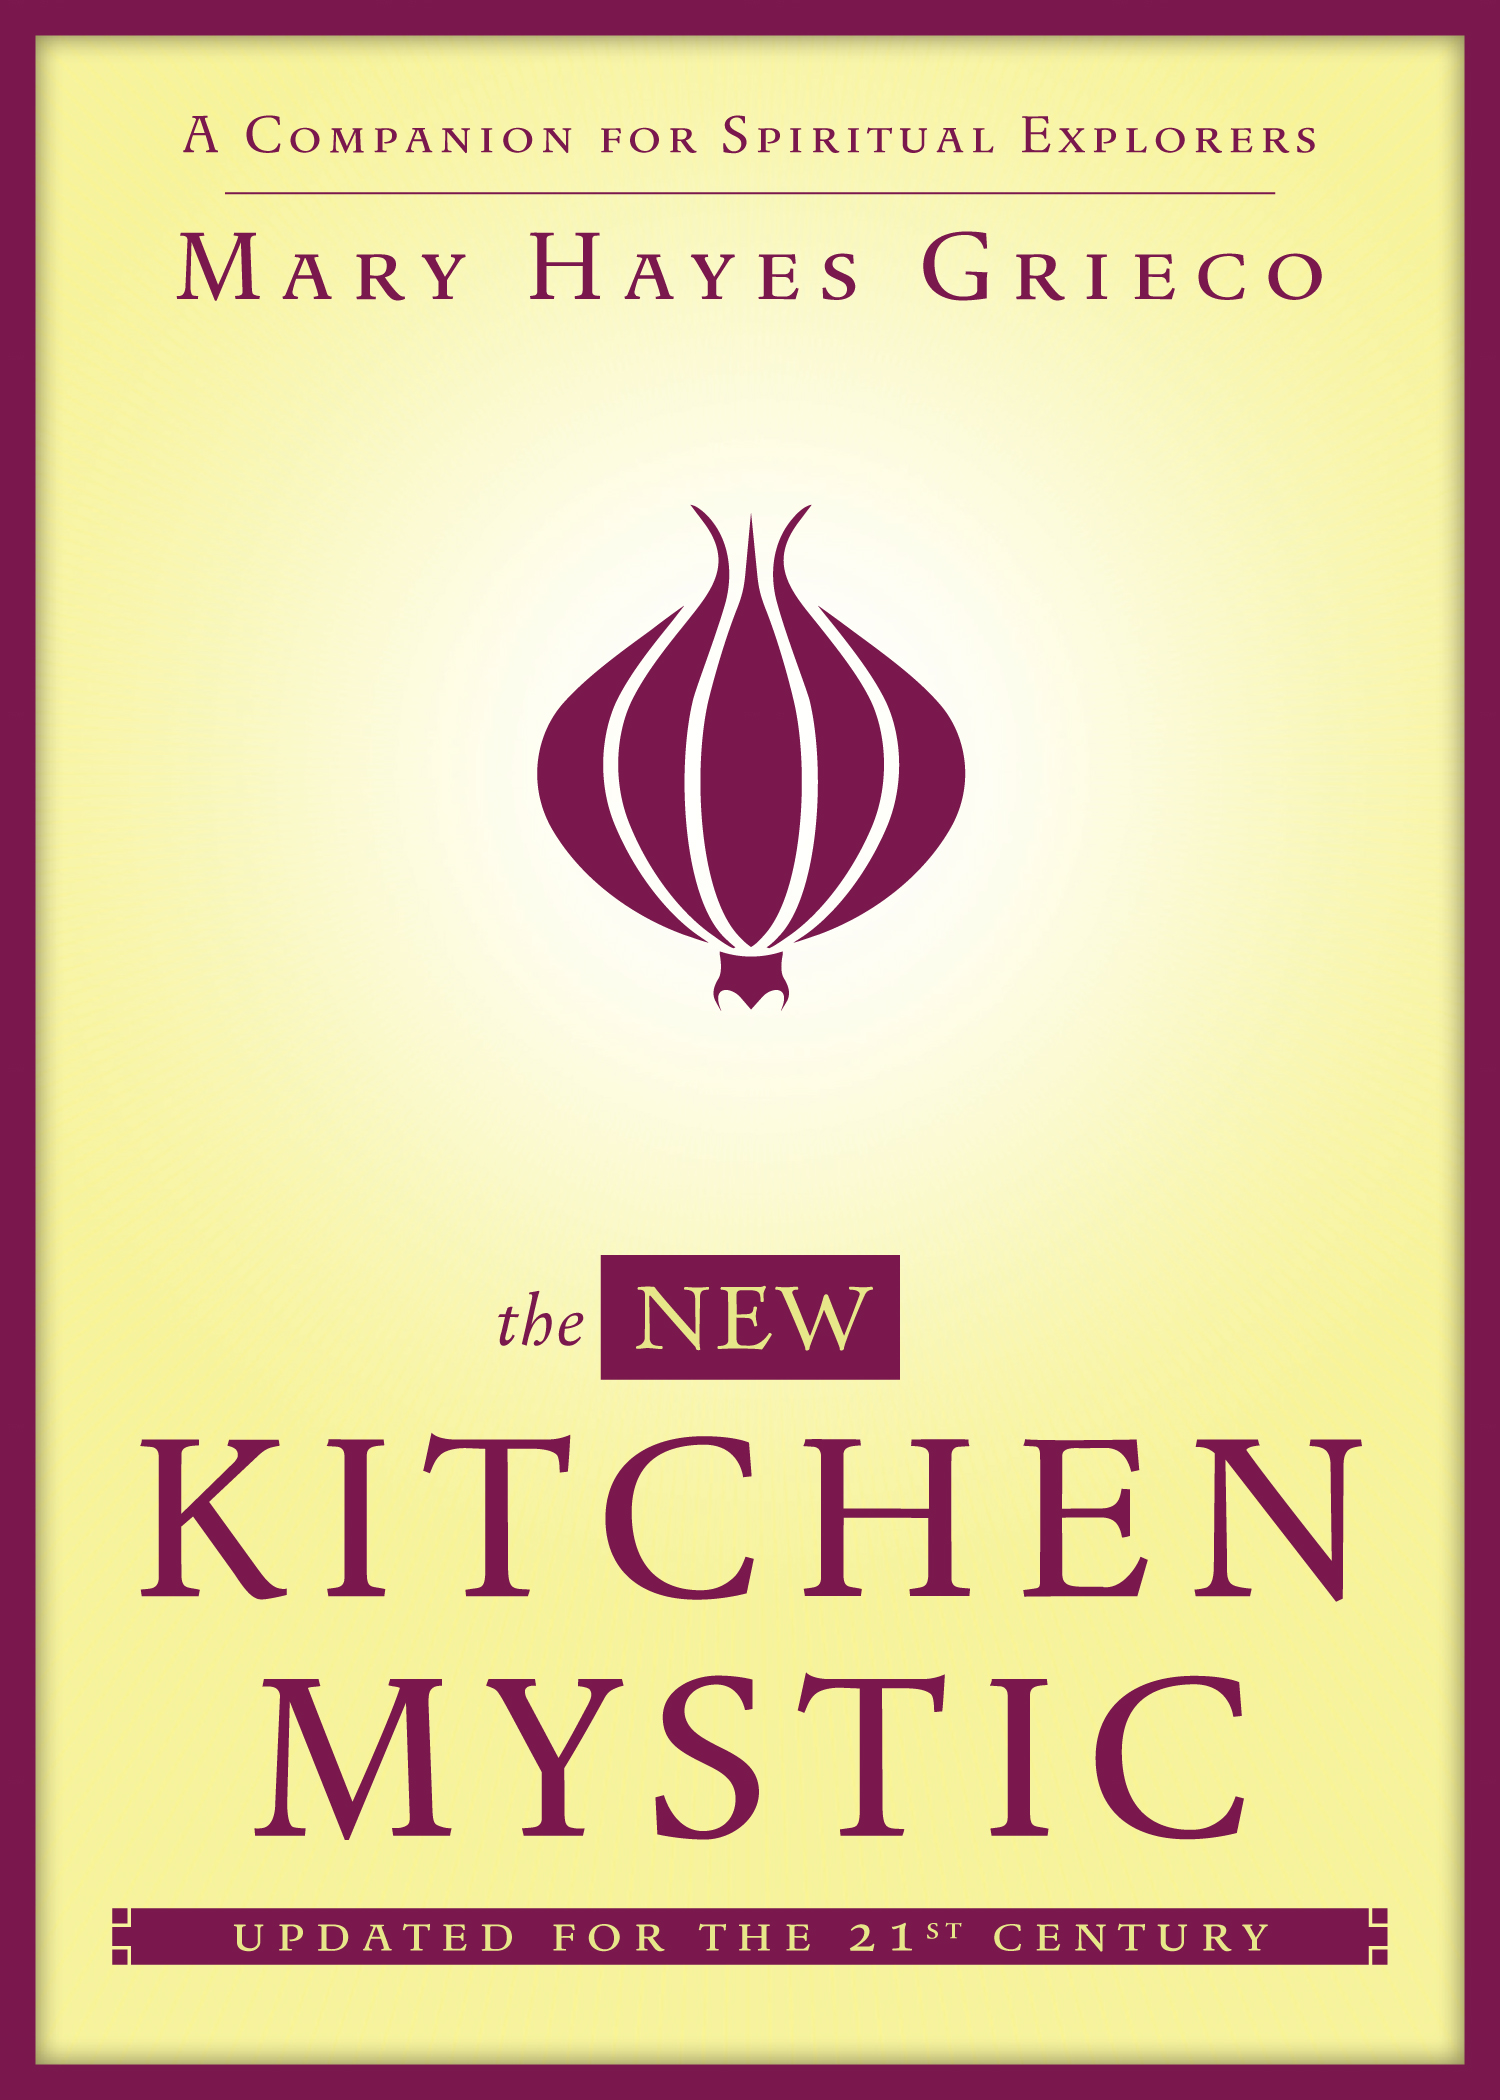 The New Kitchen Mystic by Mary Hayes Grieco